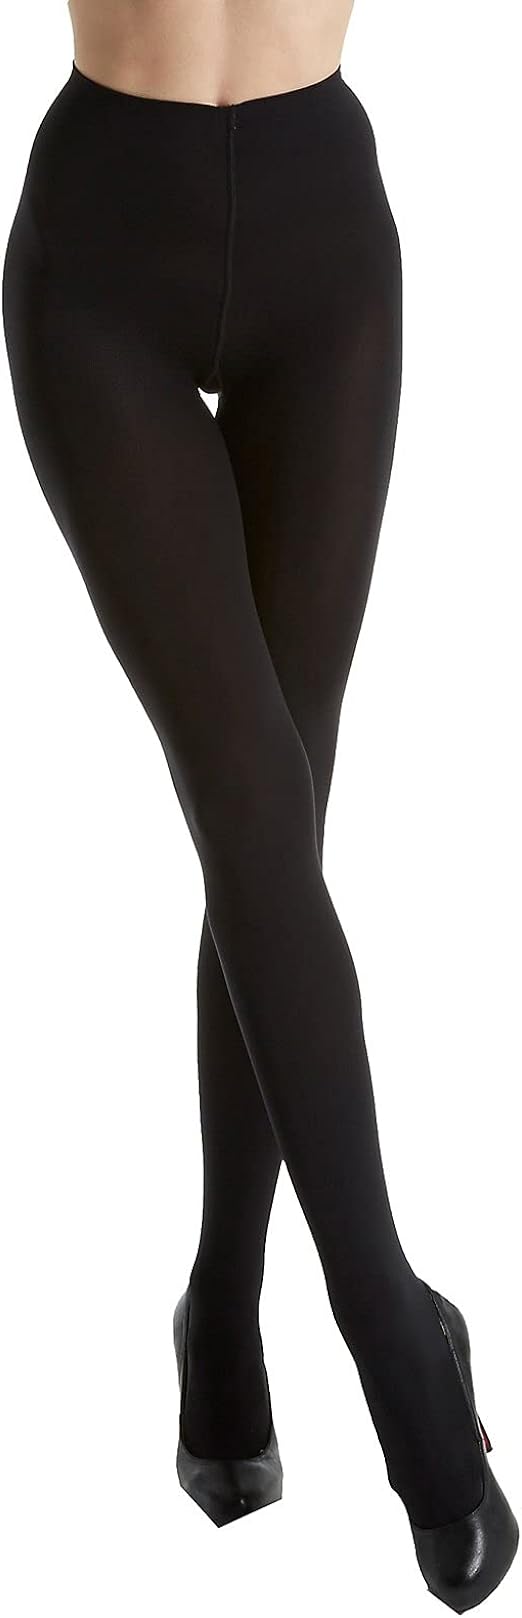 Tips & Tricks of Wearing Black Opaque Tights Like a Pro, by I Want Tights  (IWT)